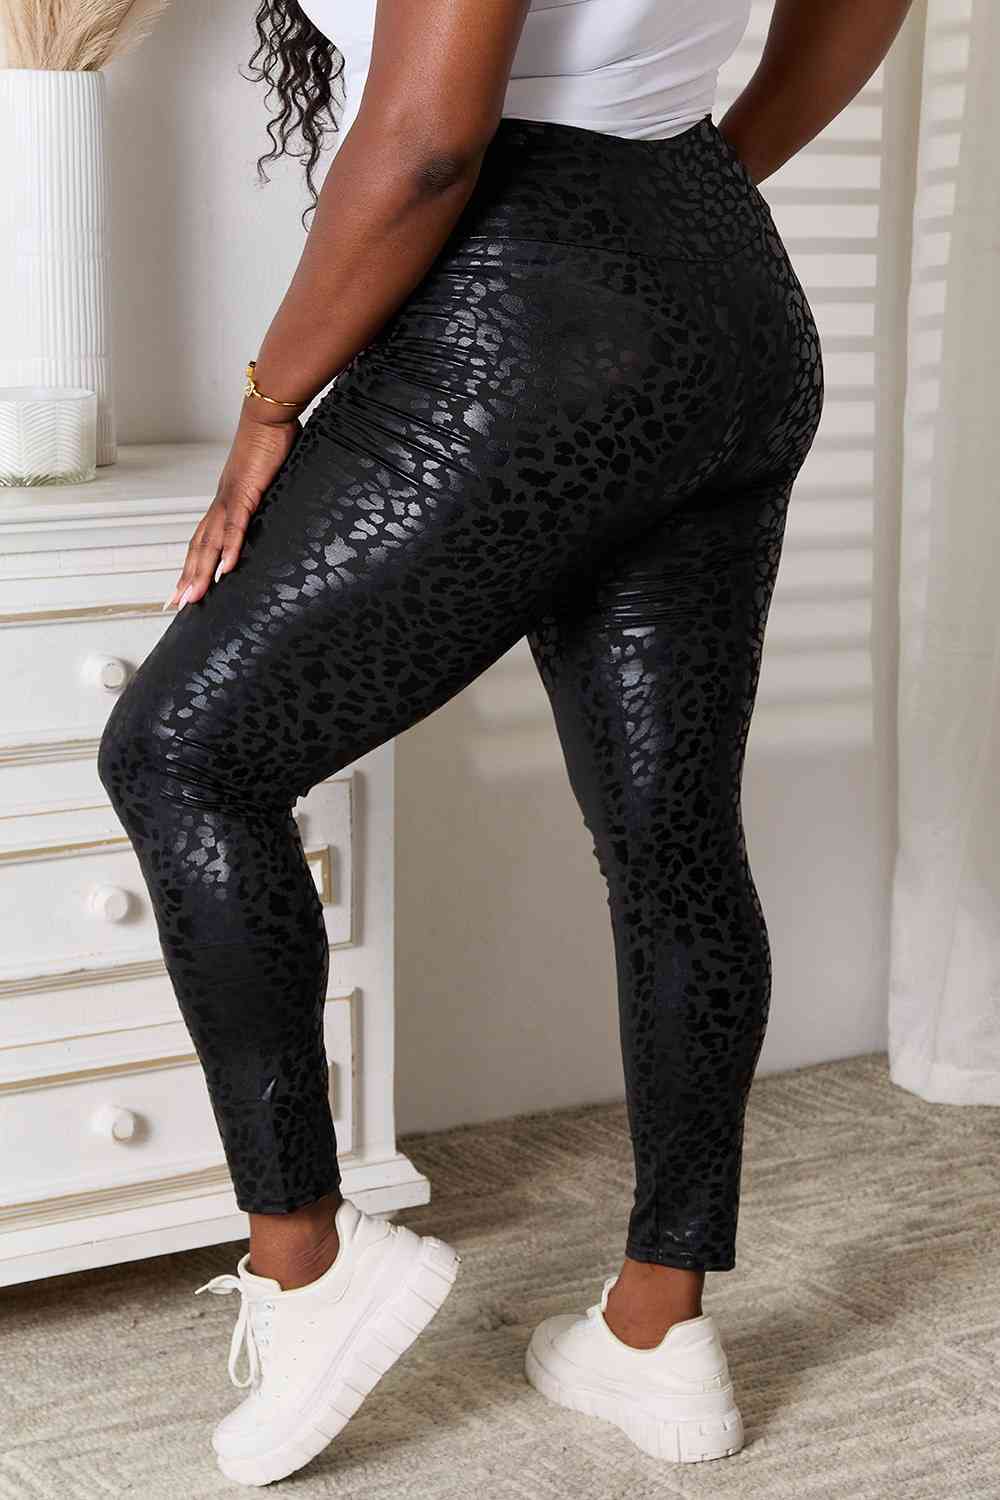 Double Take High Waist Leggings, perfect for workouts or everyday wear - black - side view